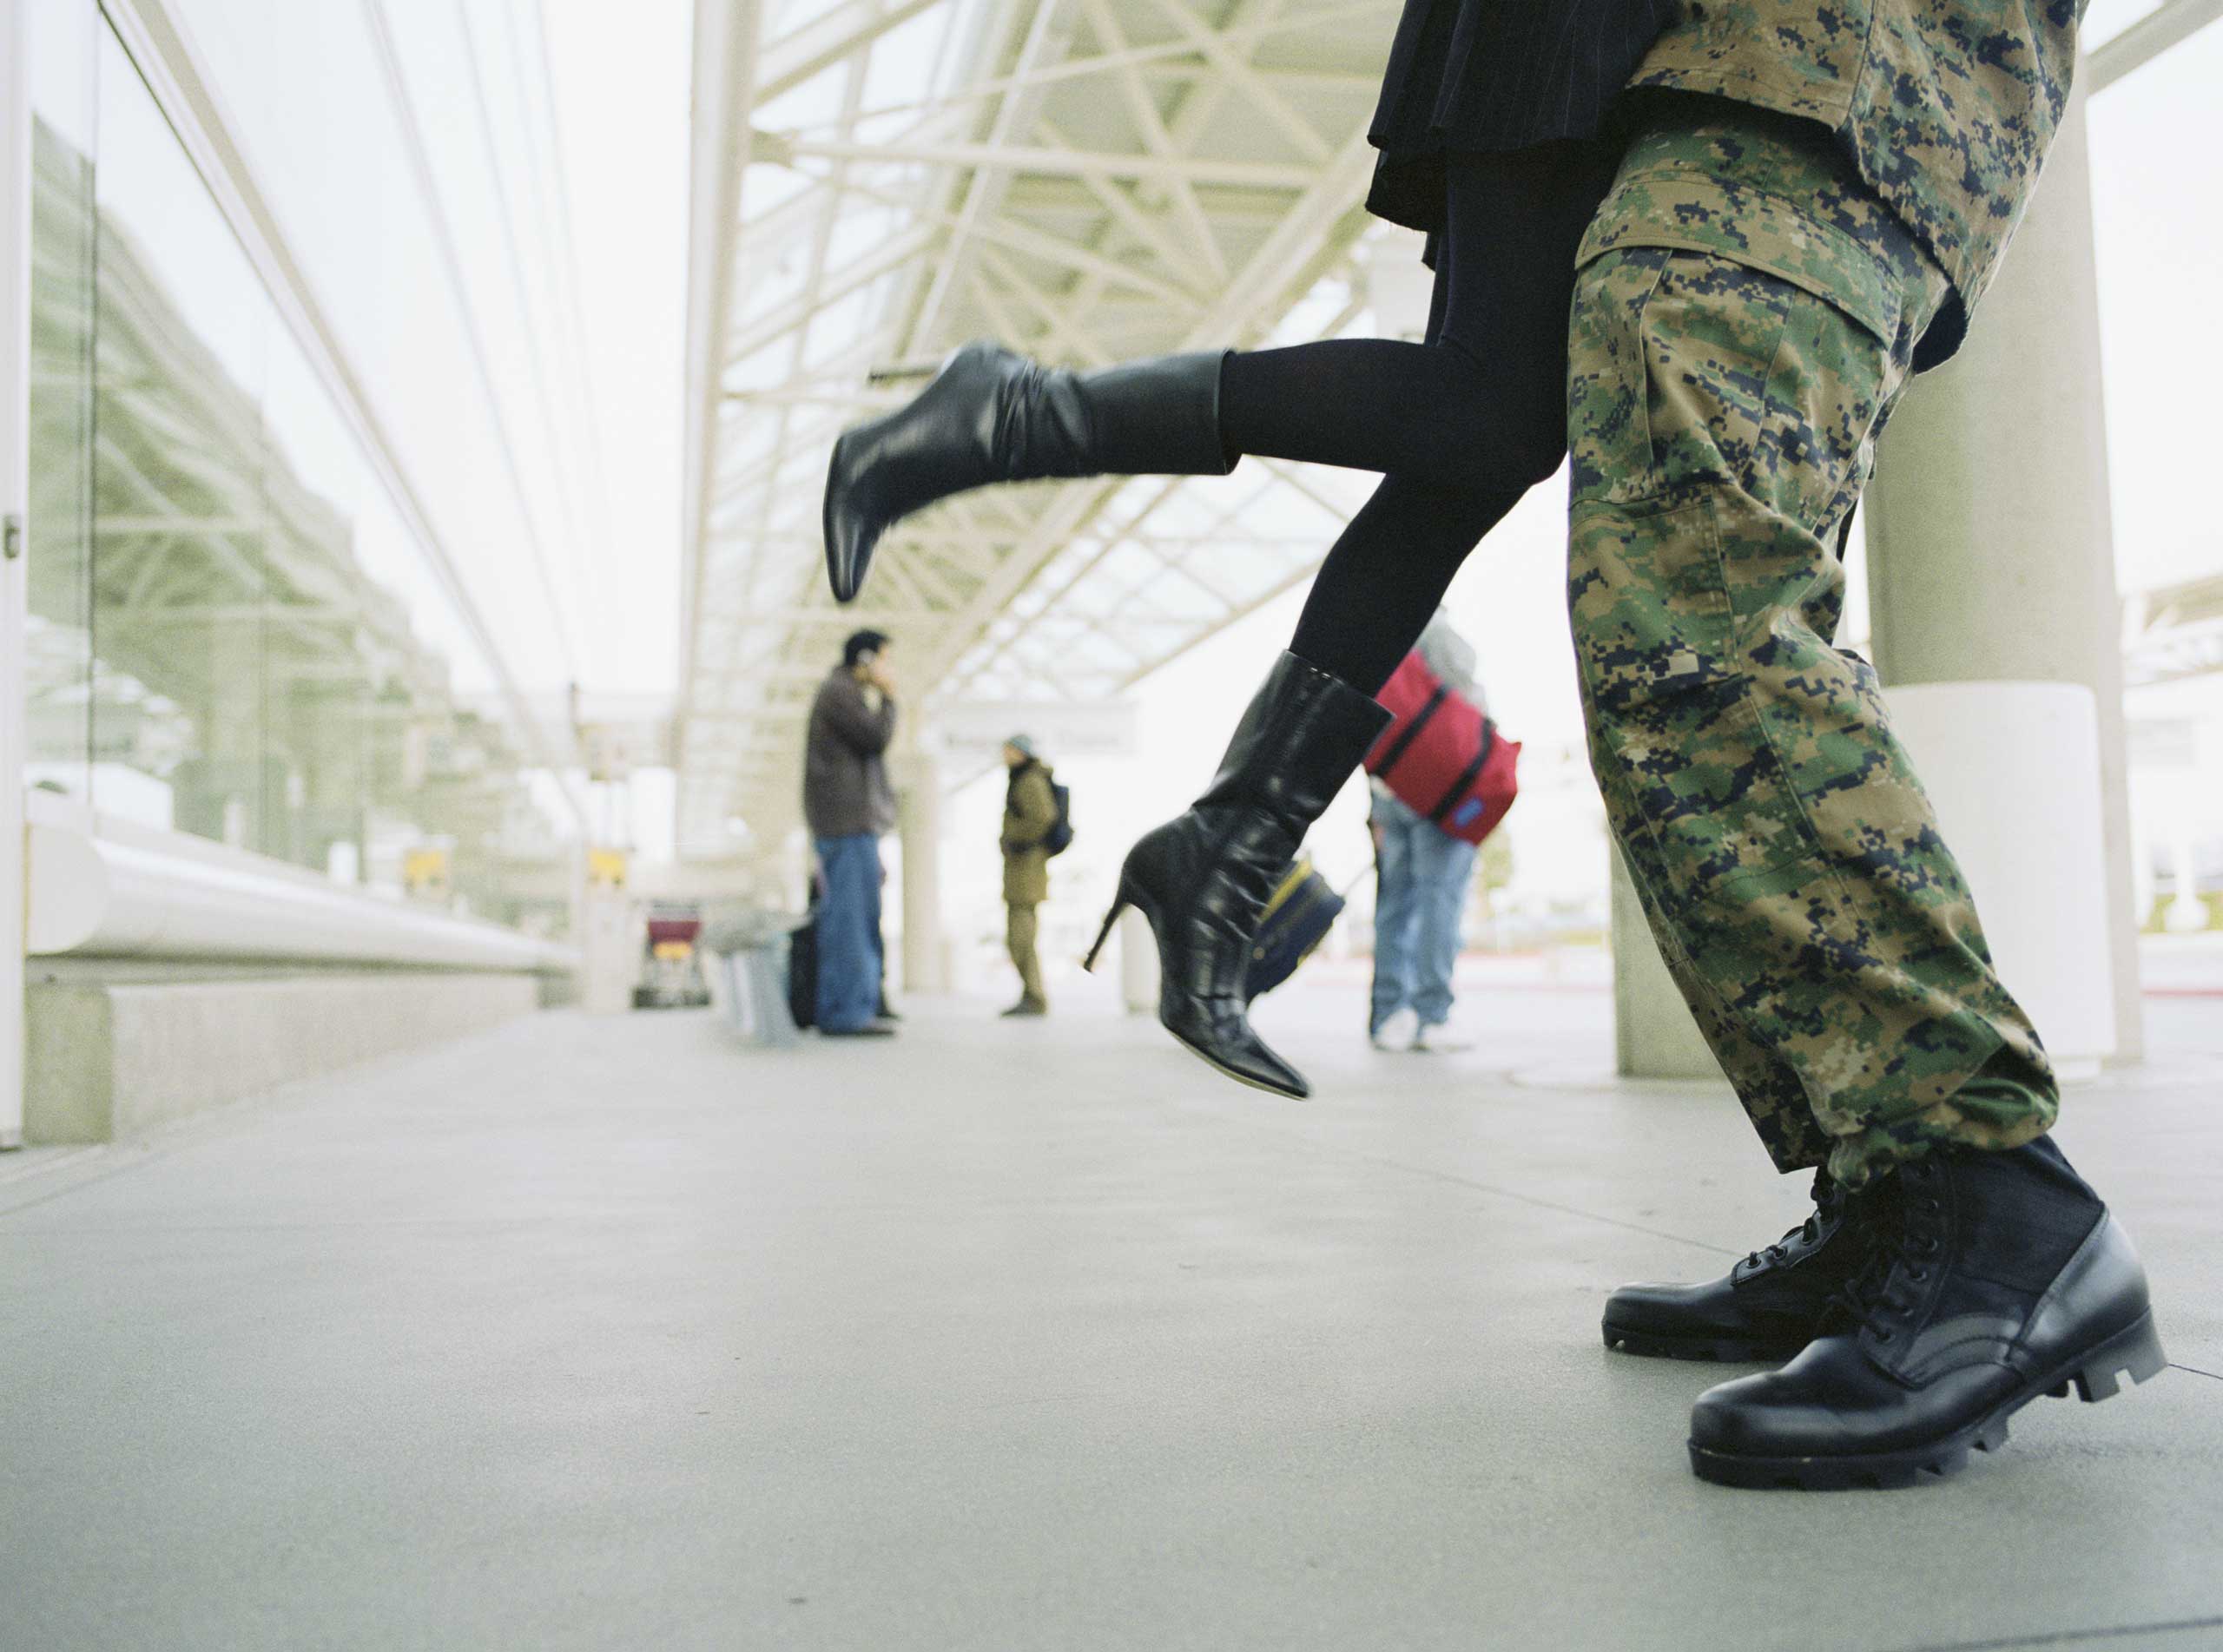 A stock image of a man in a military uniform lifting up a woman